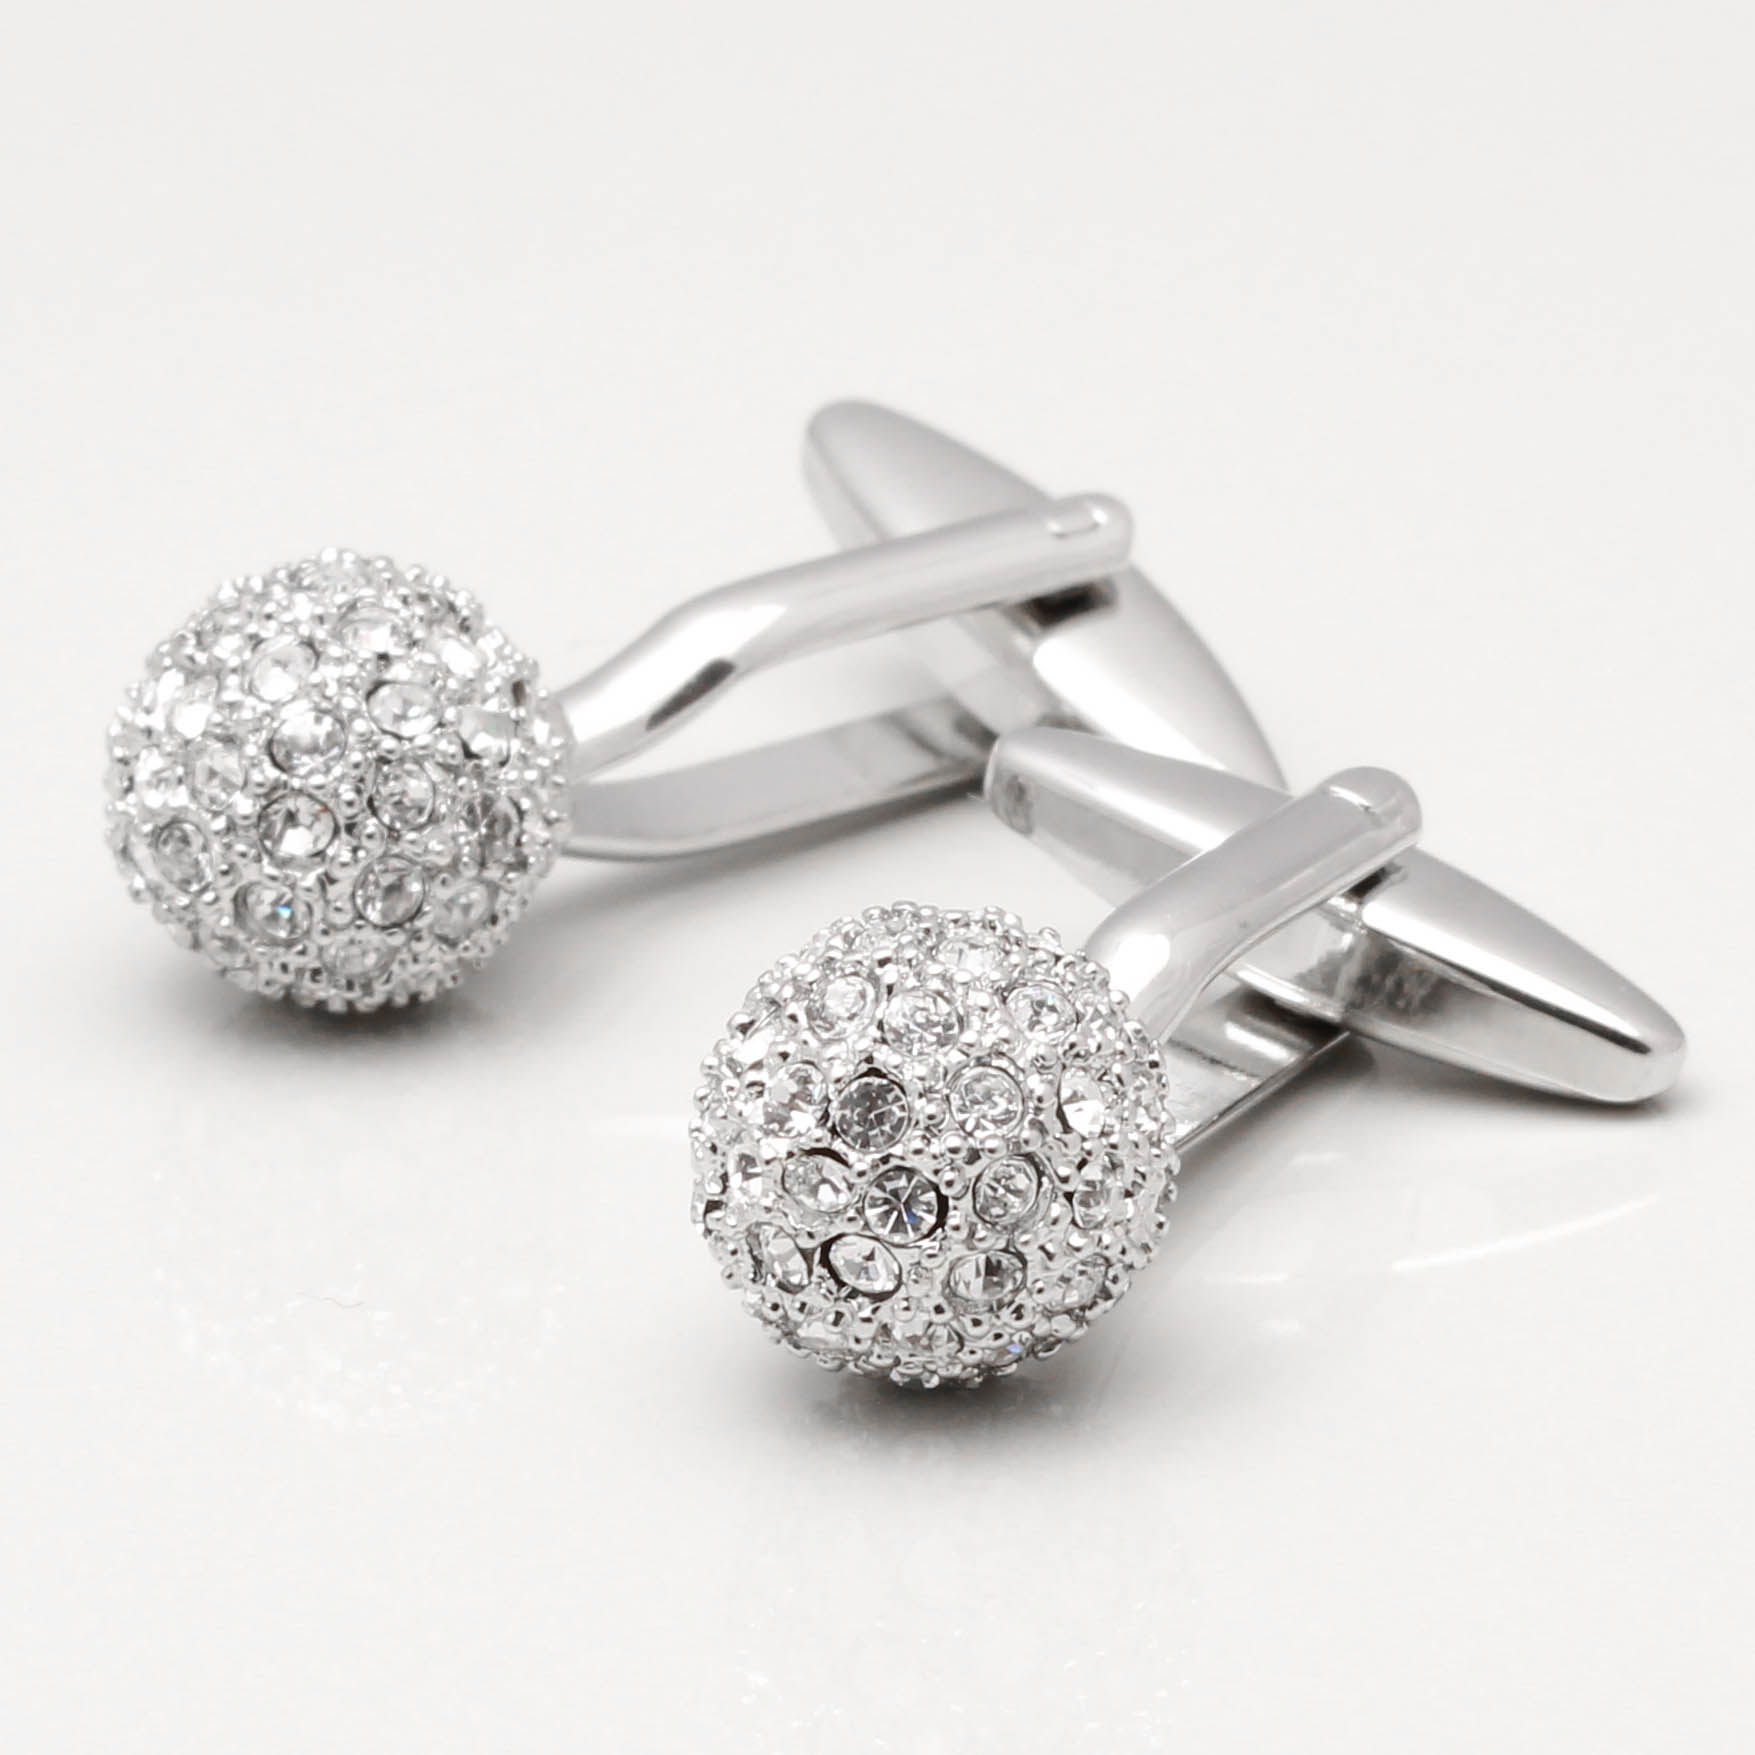 A pair of cufflinks made of clear crystal are displayed on a white table